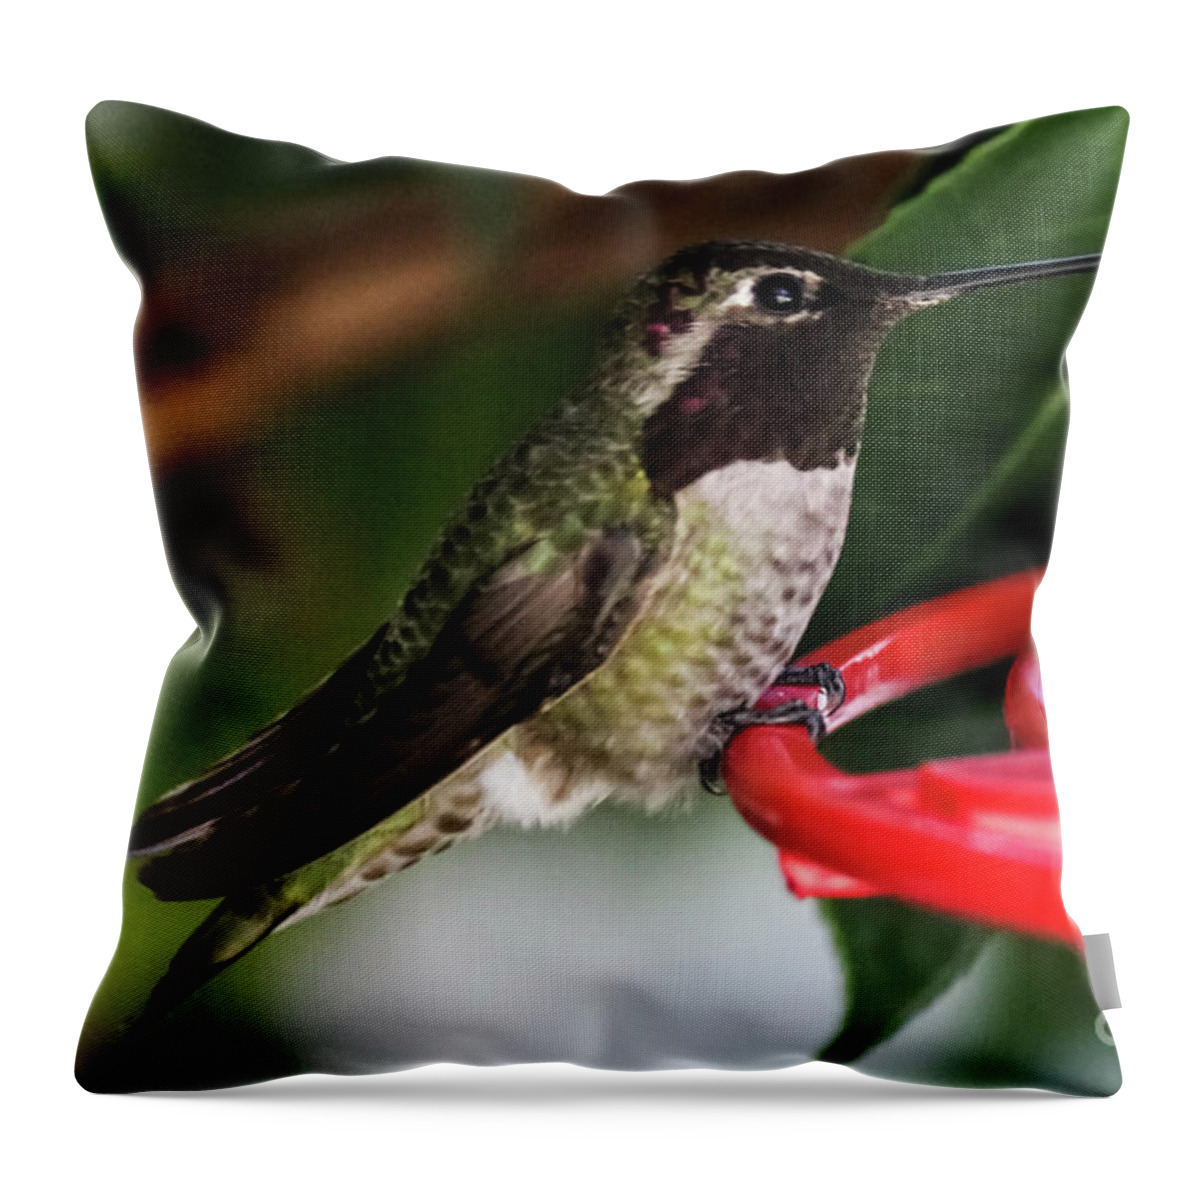 Hummingbird Throw Pillow featuring the photograph Hummingbird by Suzanne Luft